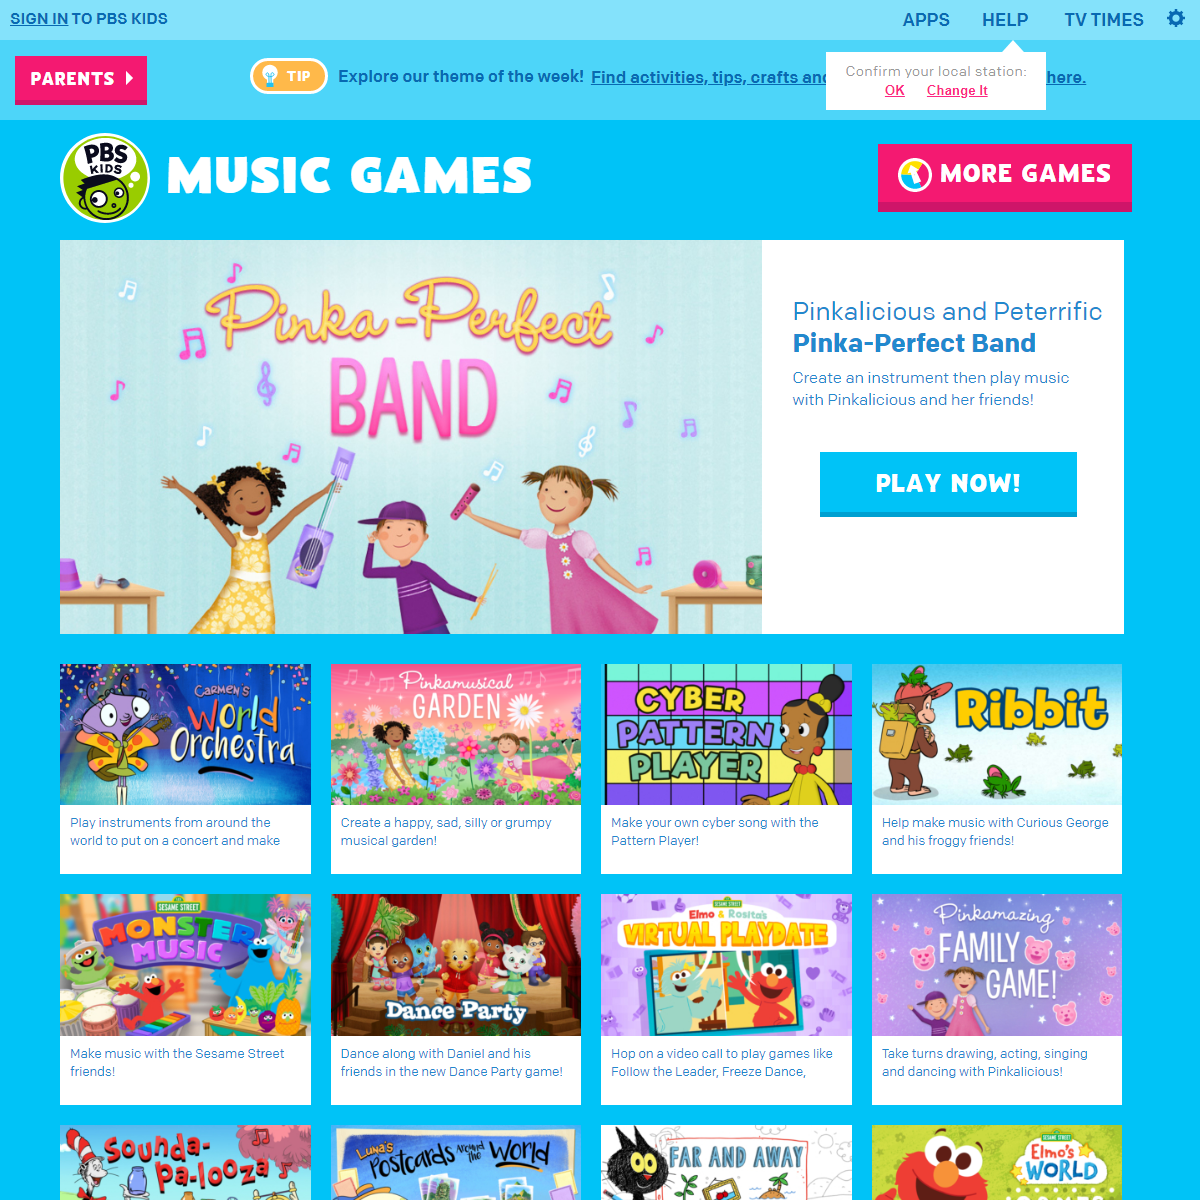 A complete backup of https://pbskids.org/games/music/